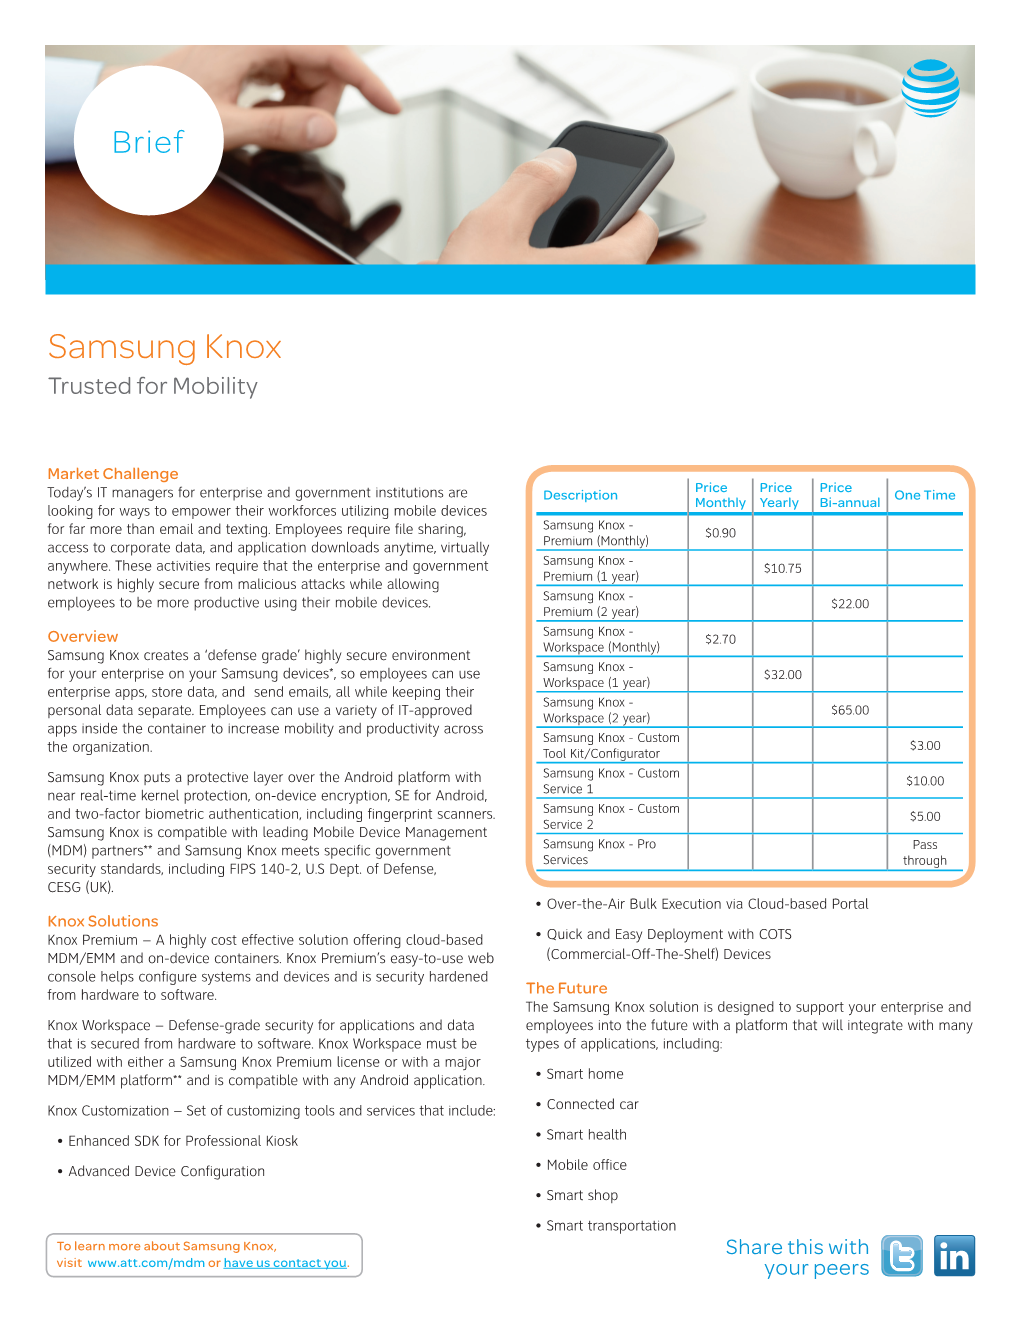 Samsung Knox Trusted for Mobility